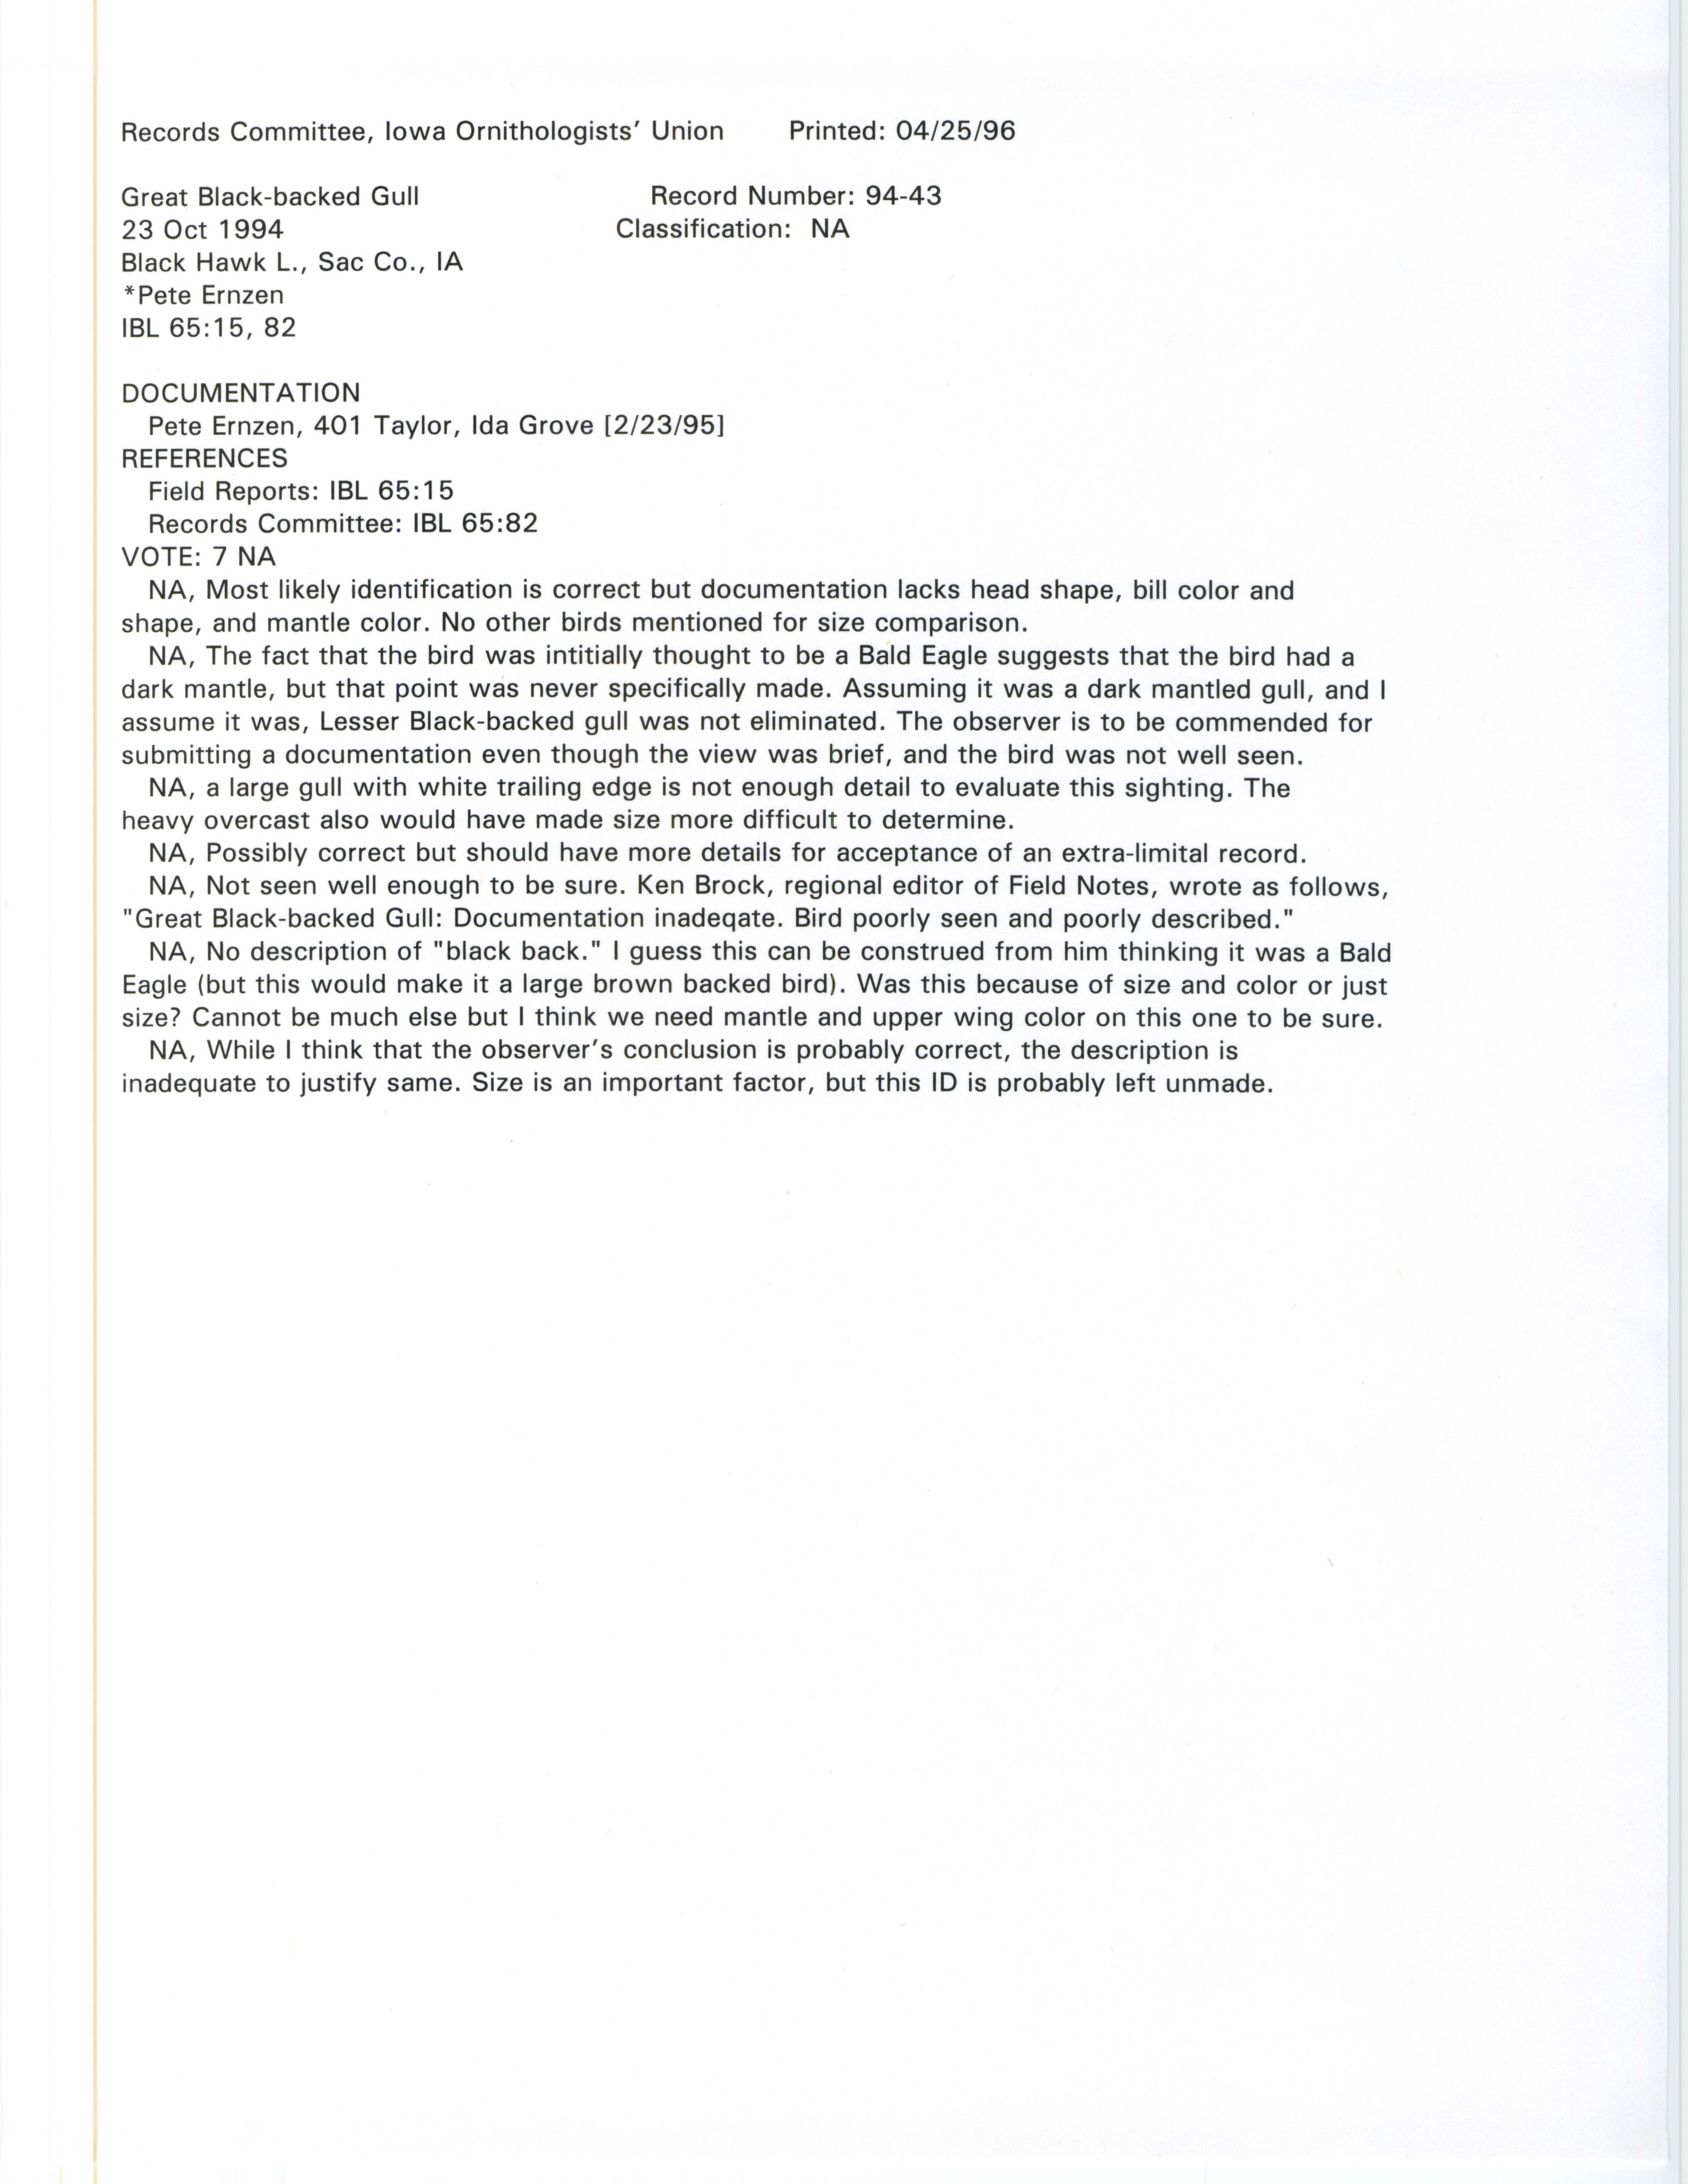 Records Committee review for rare bird sighting of Great Black-backed Gull at Black Hawk Lake, 1994